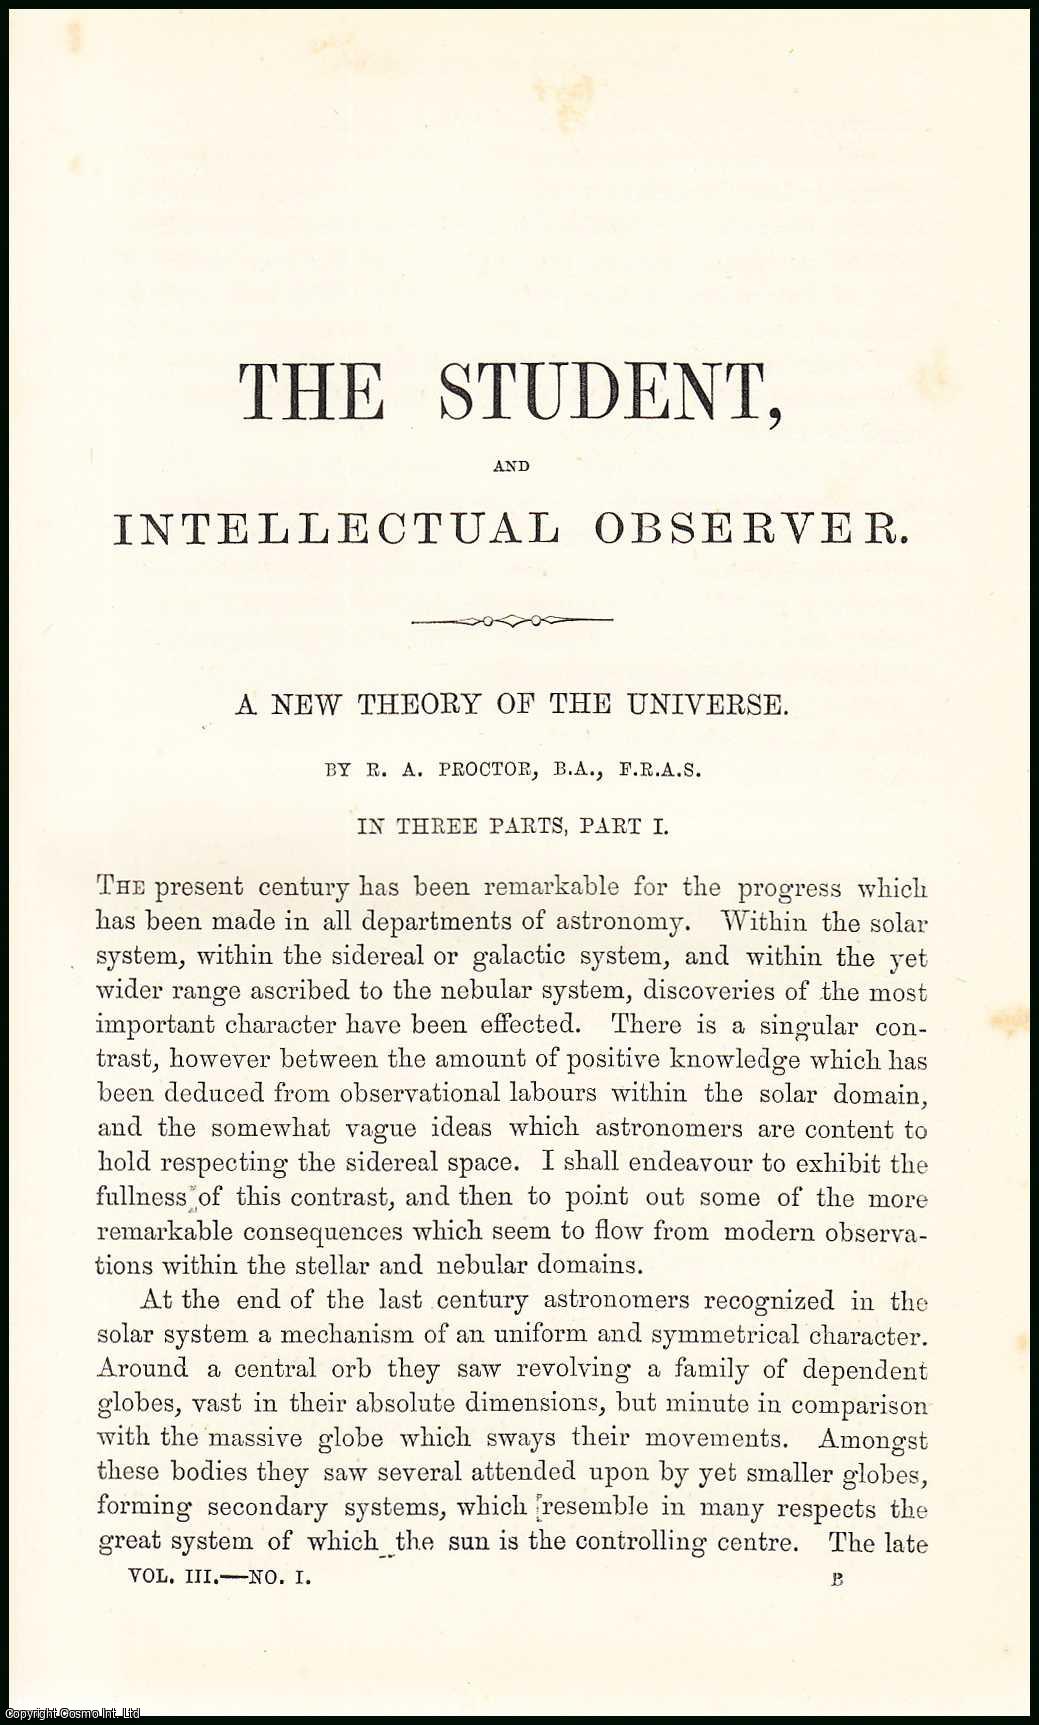 R.A. Proctor, B.A., F.R.A.S. - A New Theory of the Universe (part 1). An uncommon original article from the Student and Intellectual Observer of Science Literature & Art, 1869.